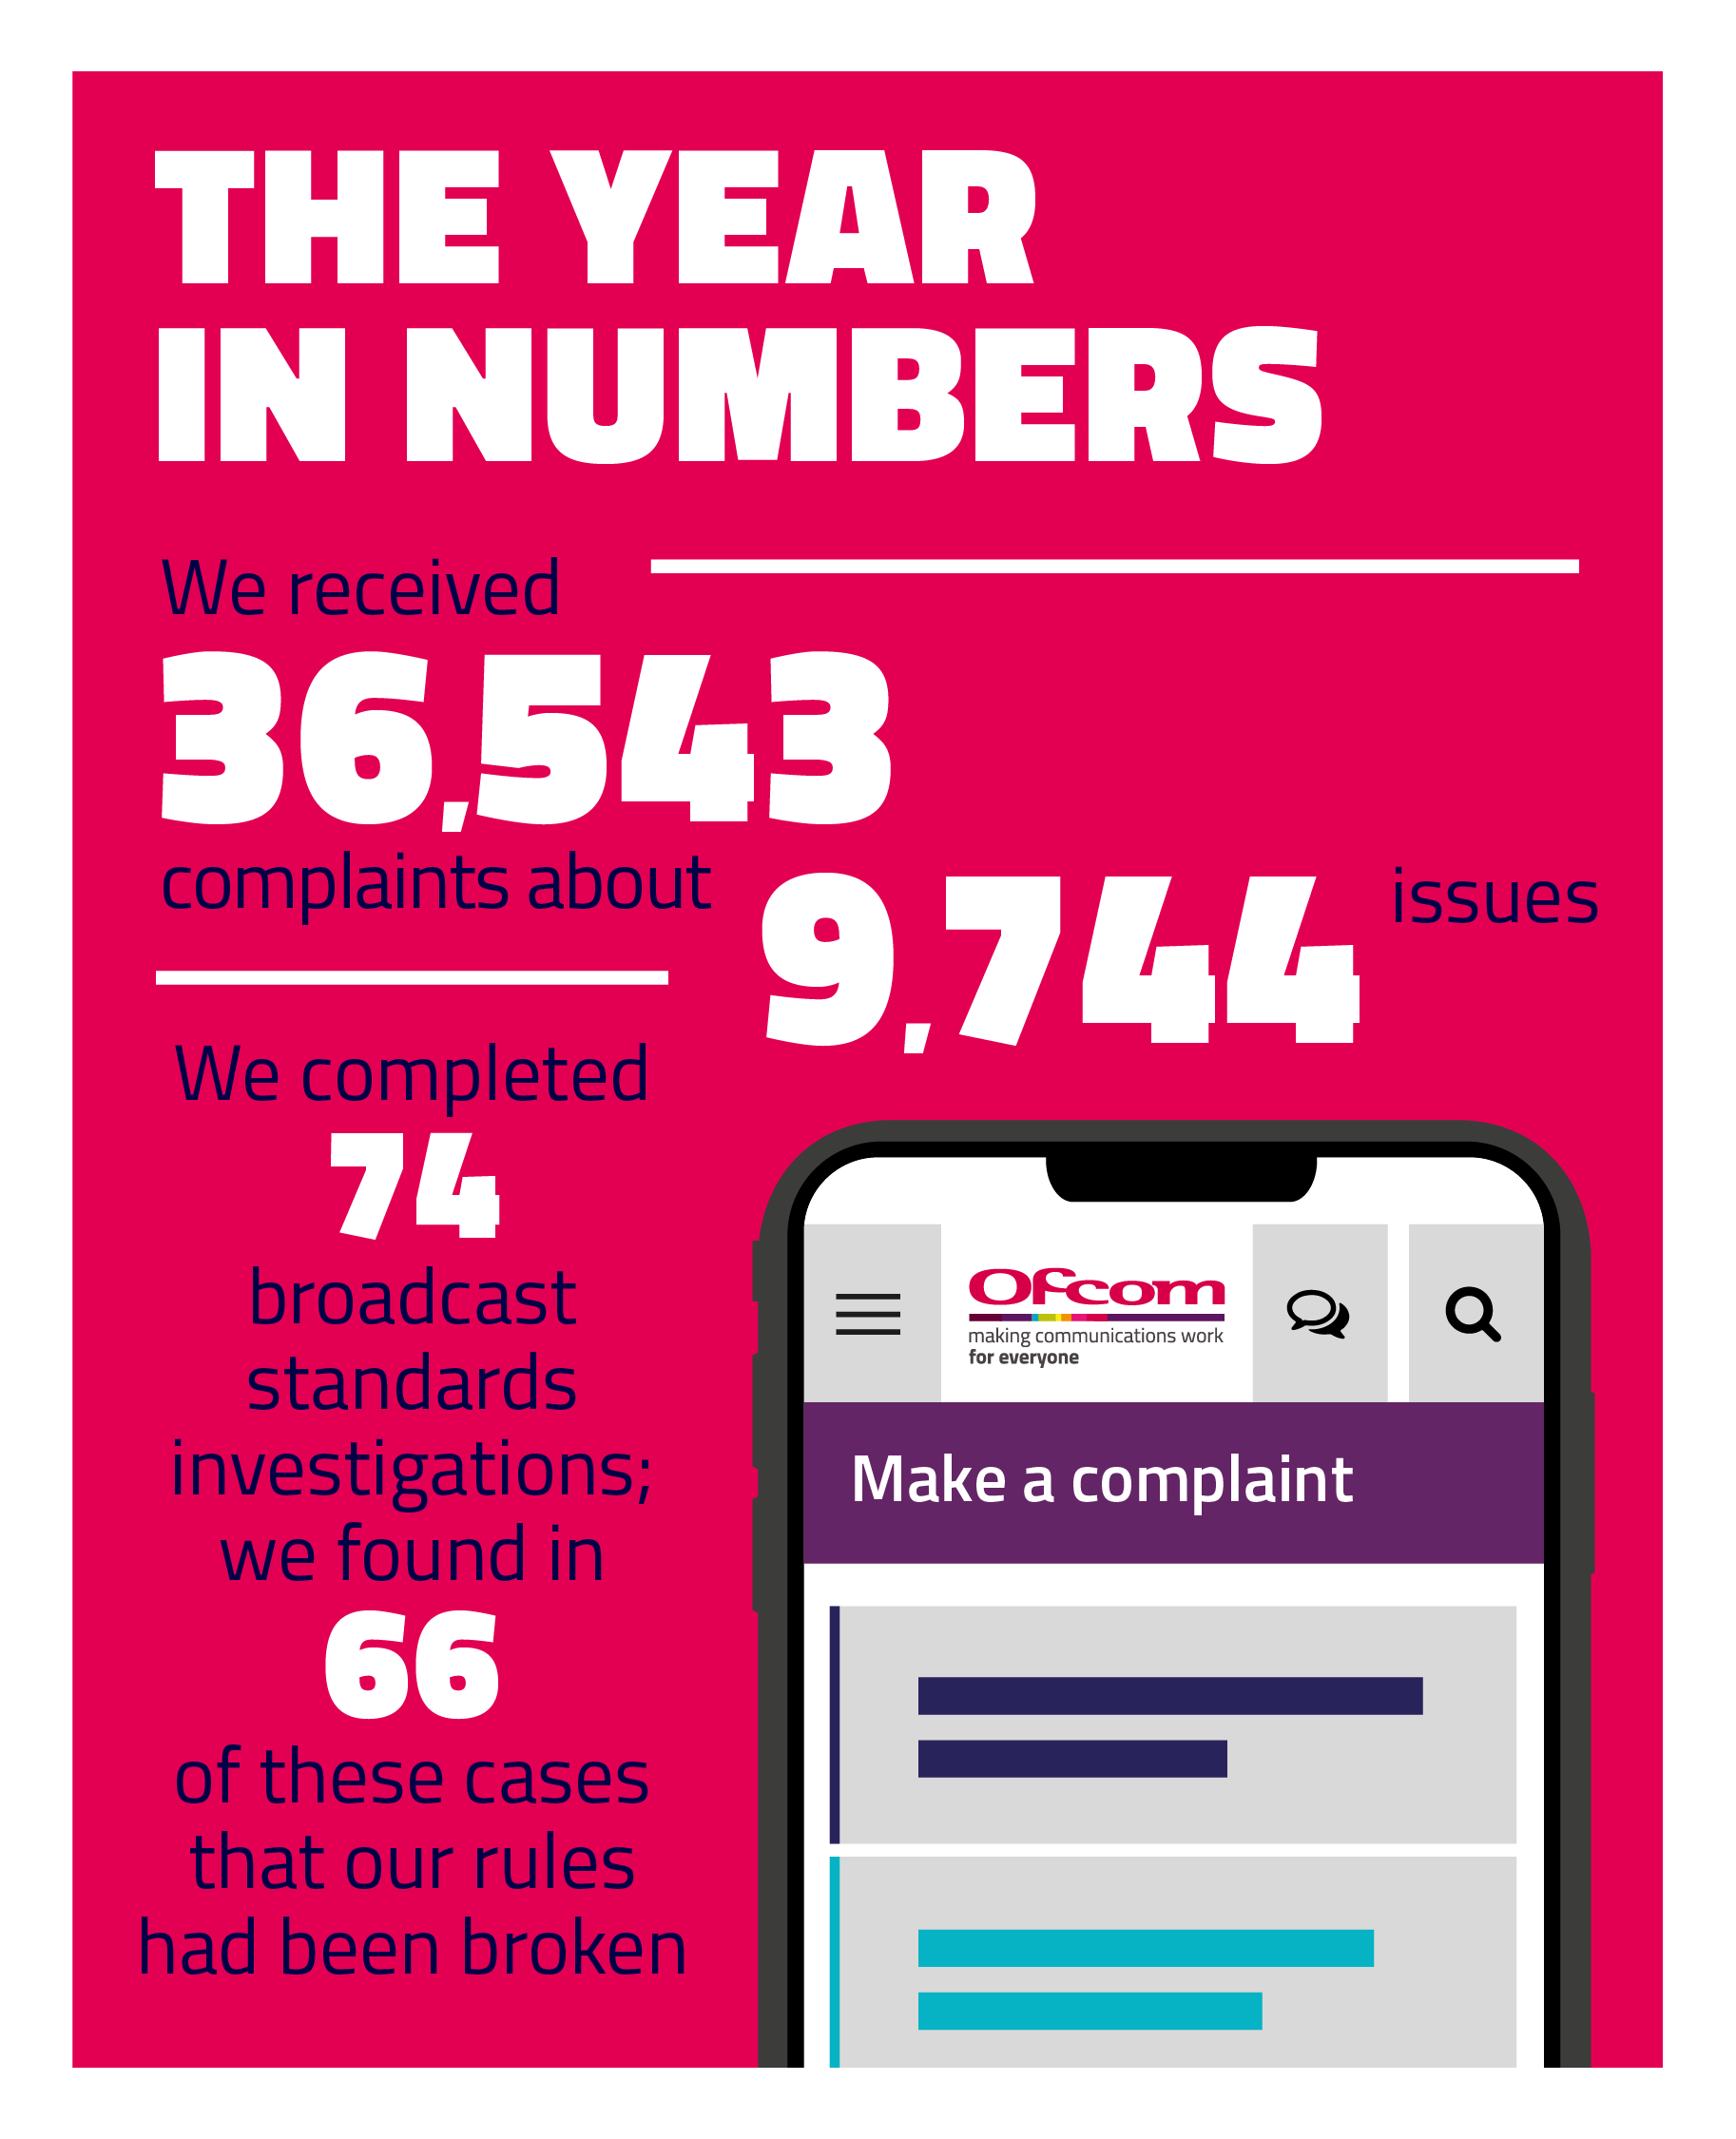 During the year, we received 36,543 complaints about 9,744 issues. We completed 74 broadcast standards investigations; we found in 66 of these cases that our rules had been broken. 